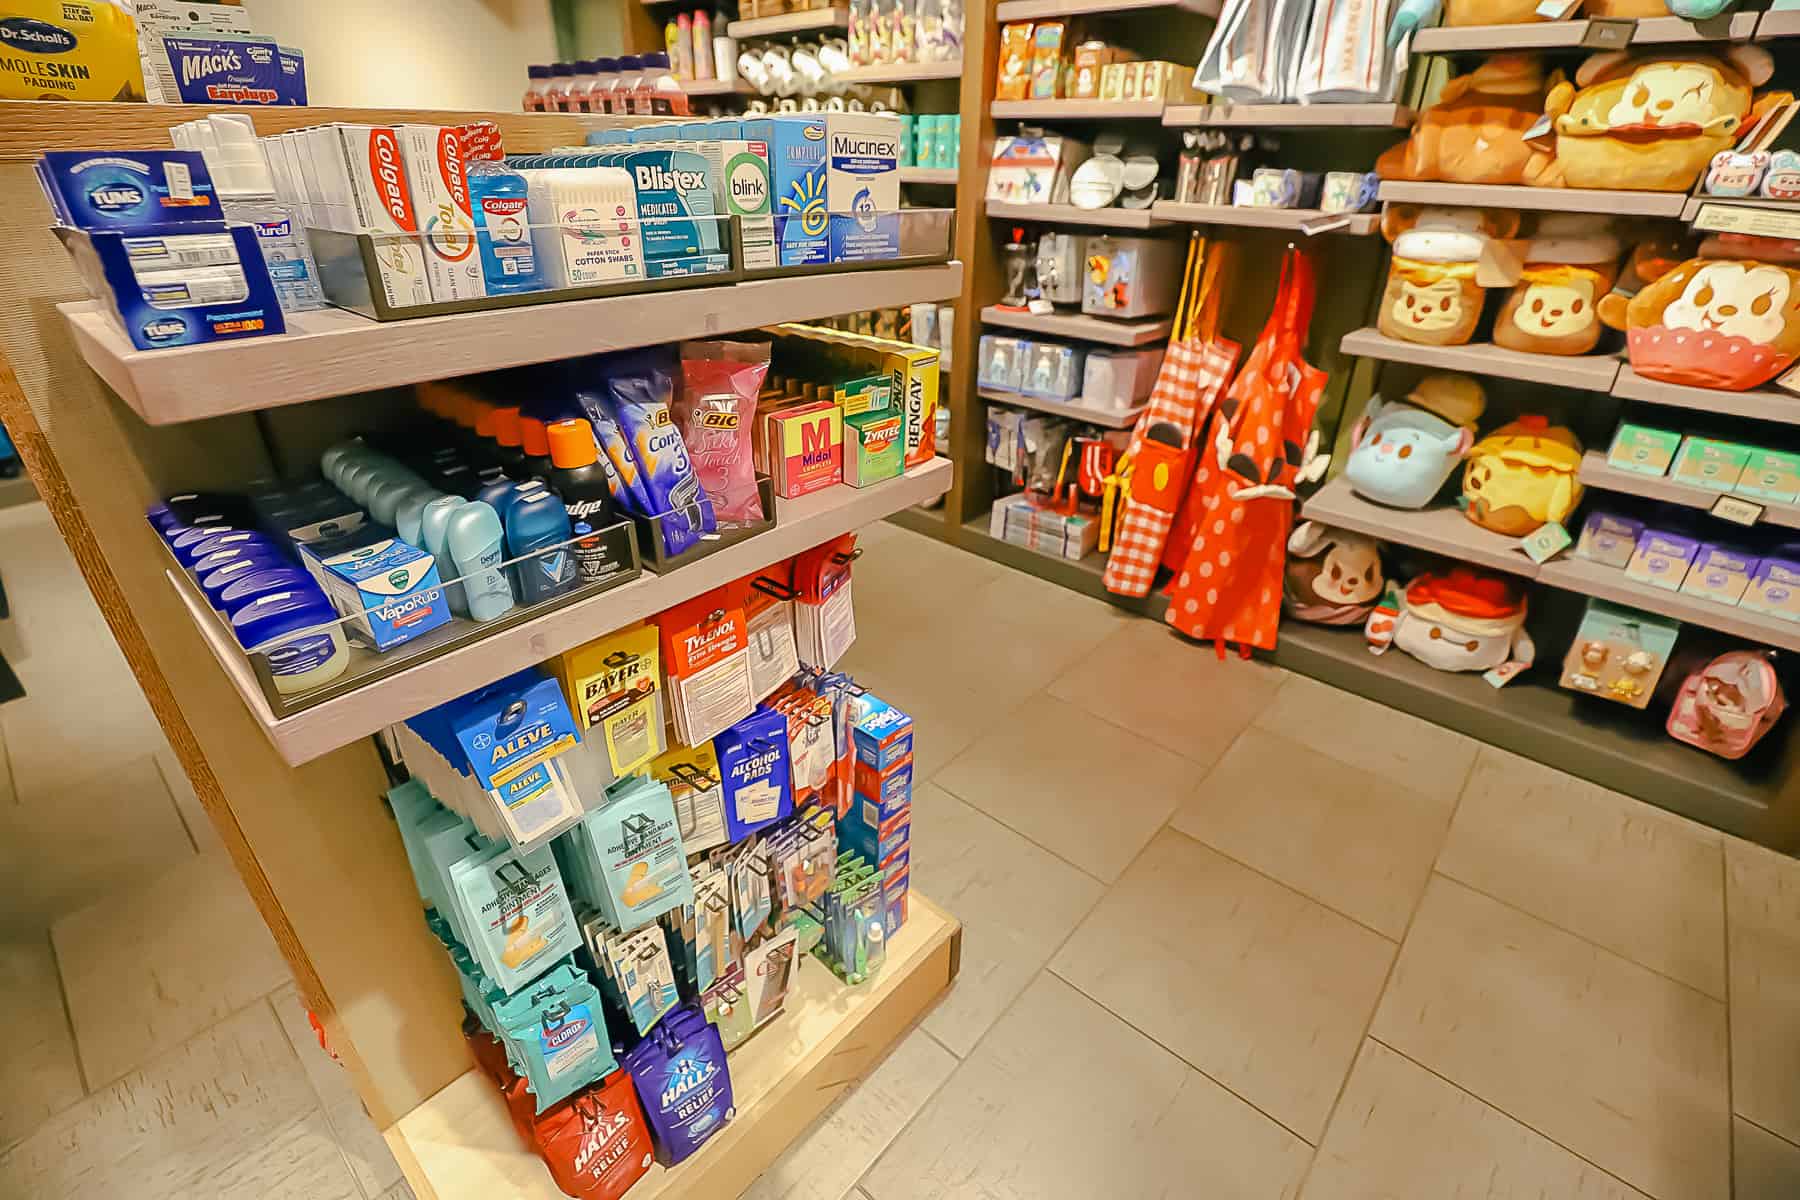 a display with health and beauty items including medicine, deodorant 